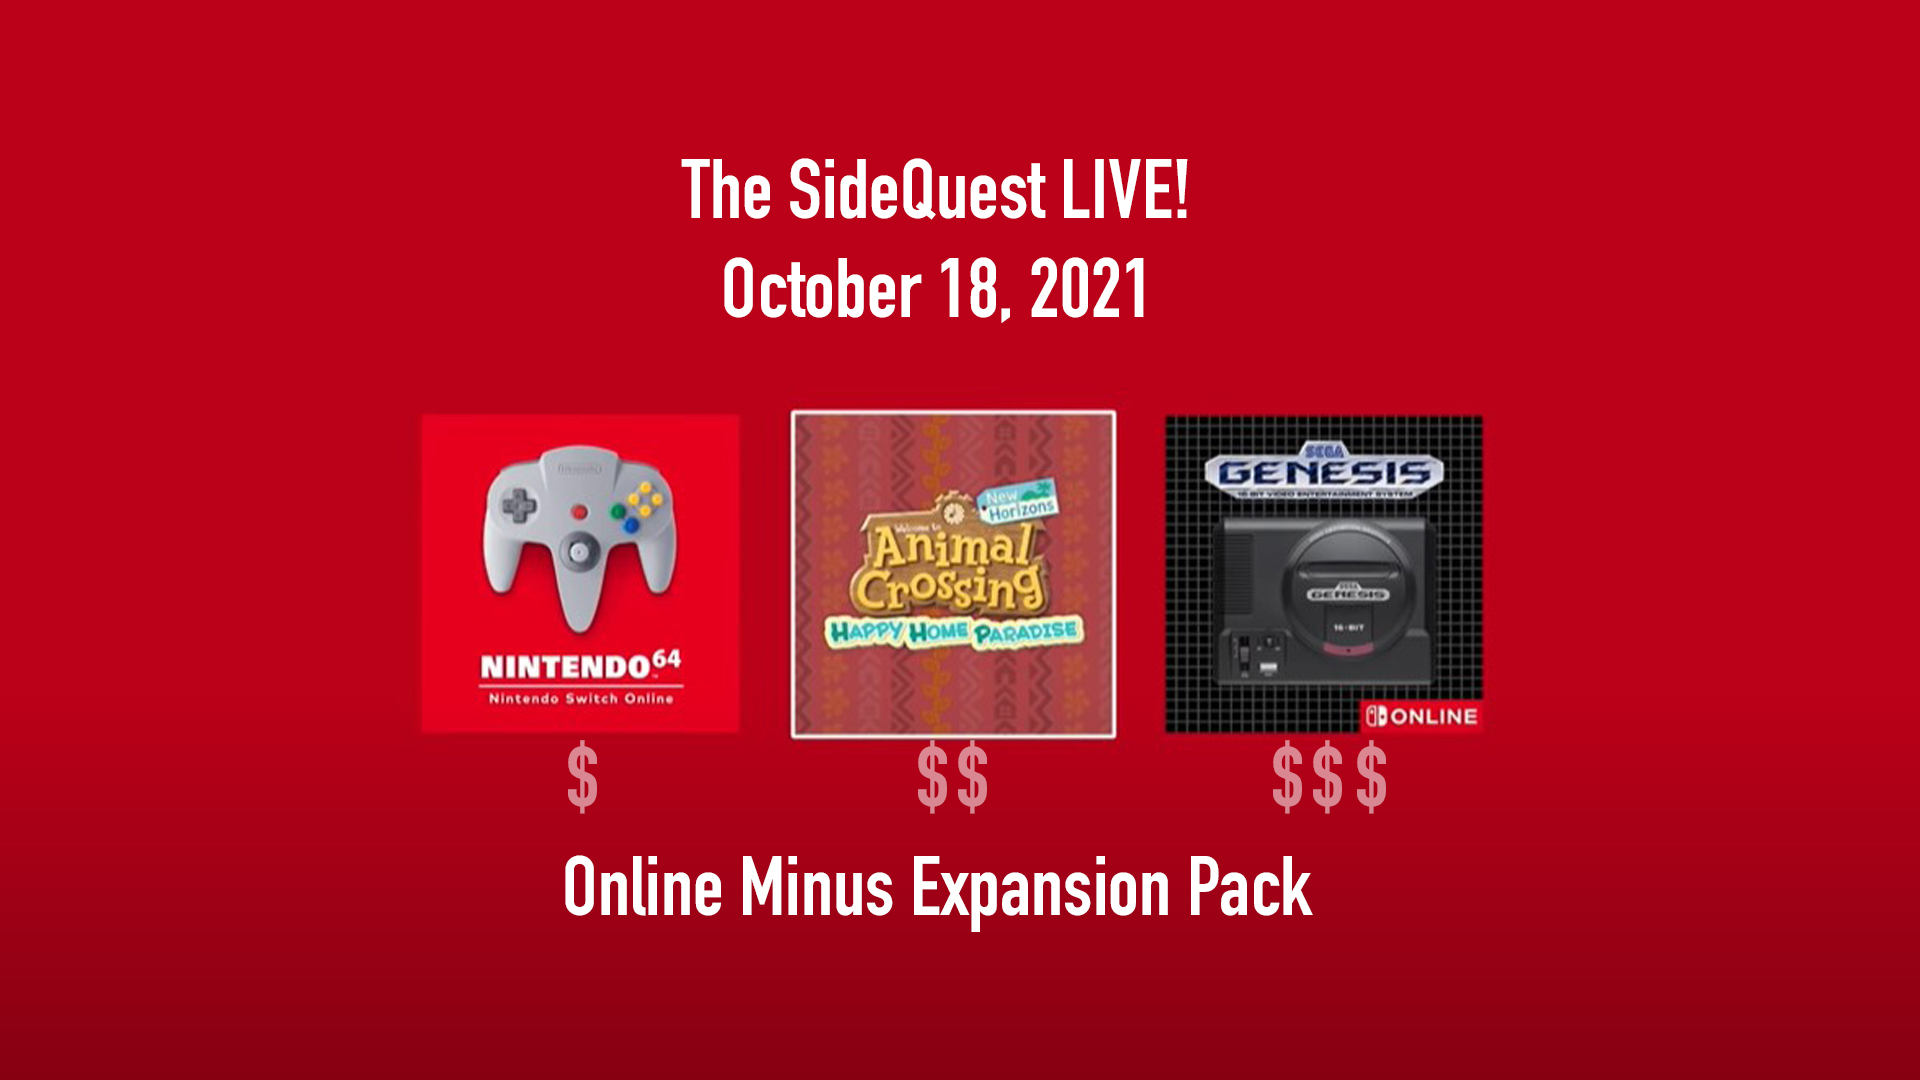 The SideQuest LIVE! October 18, 2021: Online Minus Expansion Pack